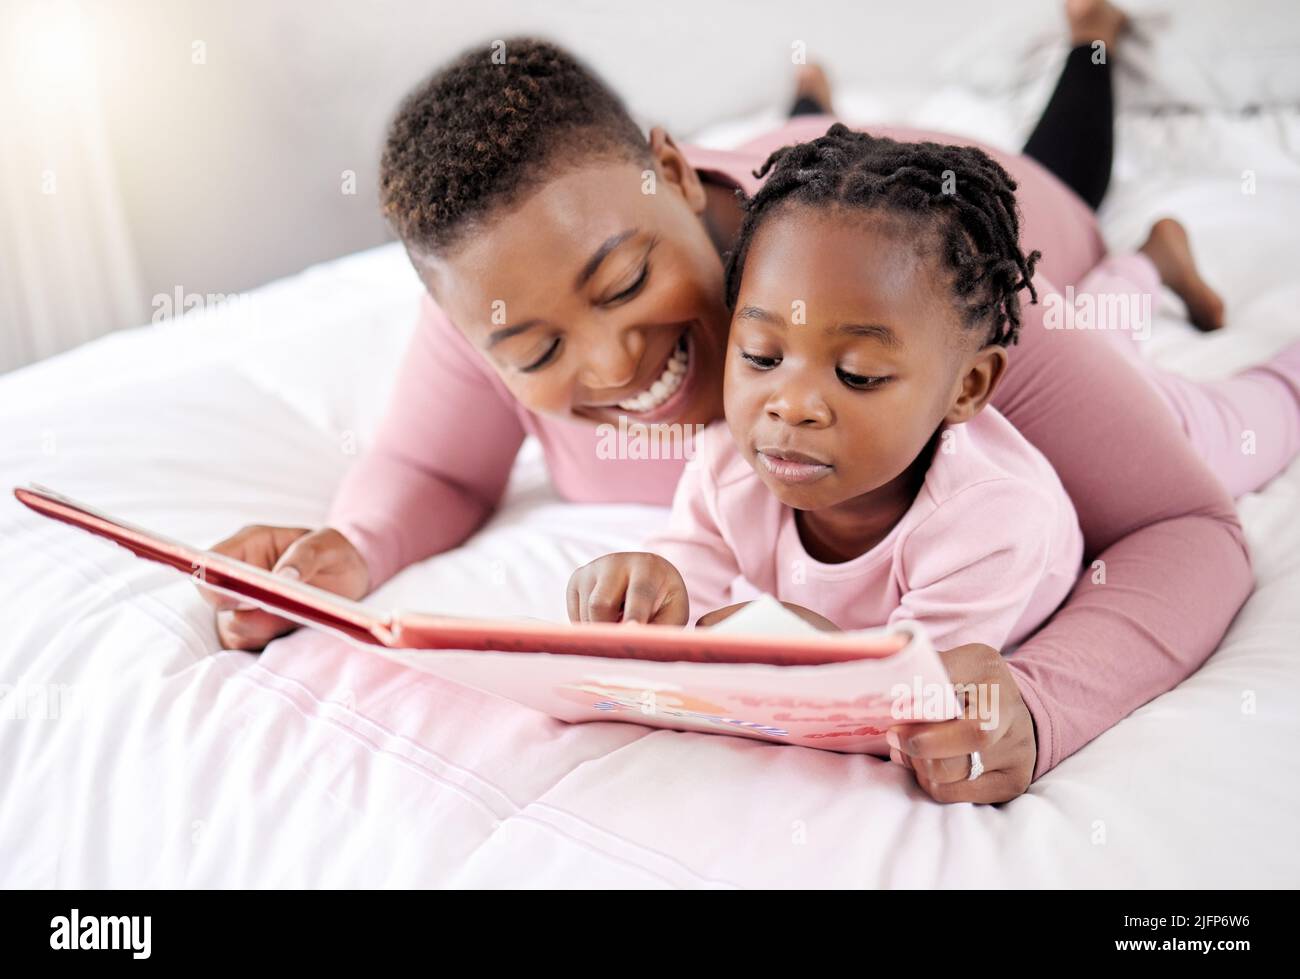 Take your time, try your best. Shot of a beautiful young woman bonding with her daughter in bed at home. Stock Photo